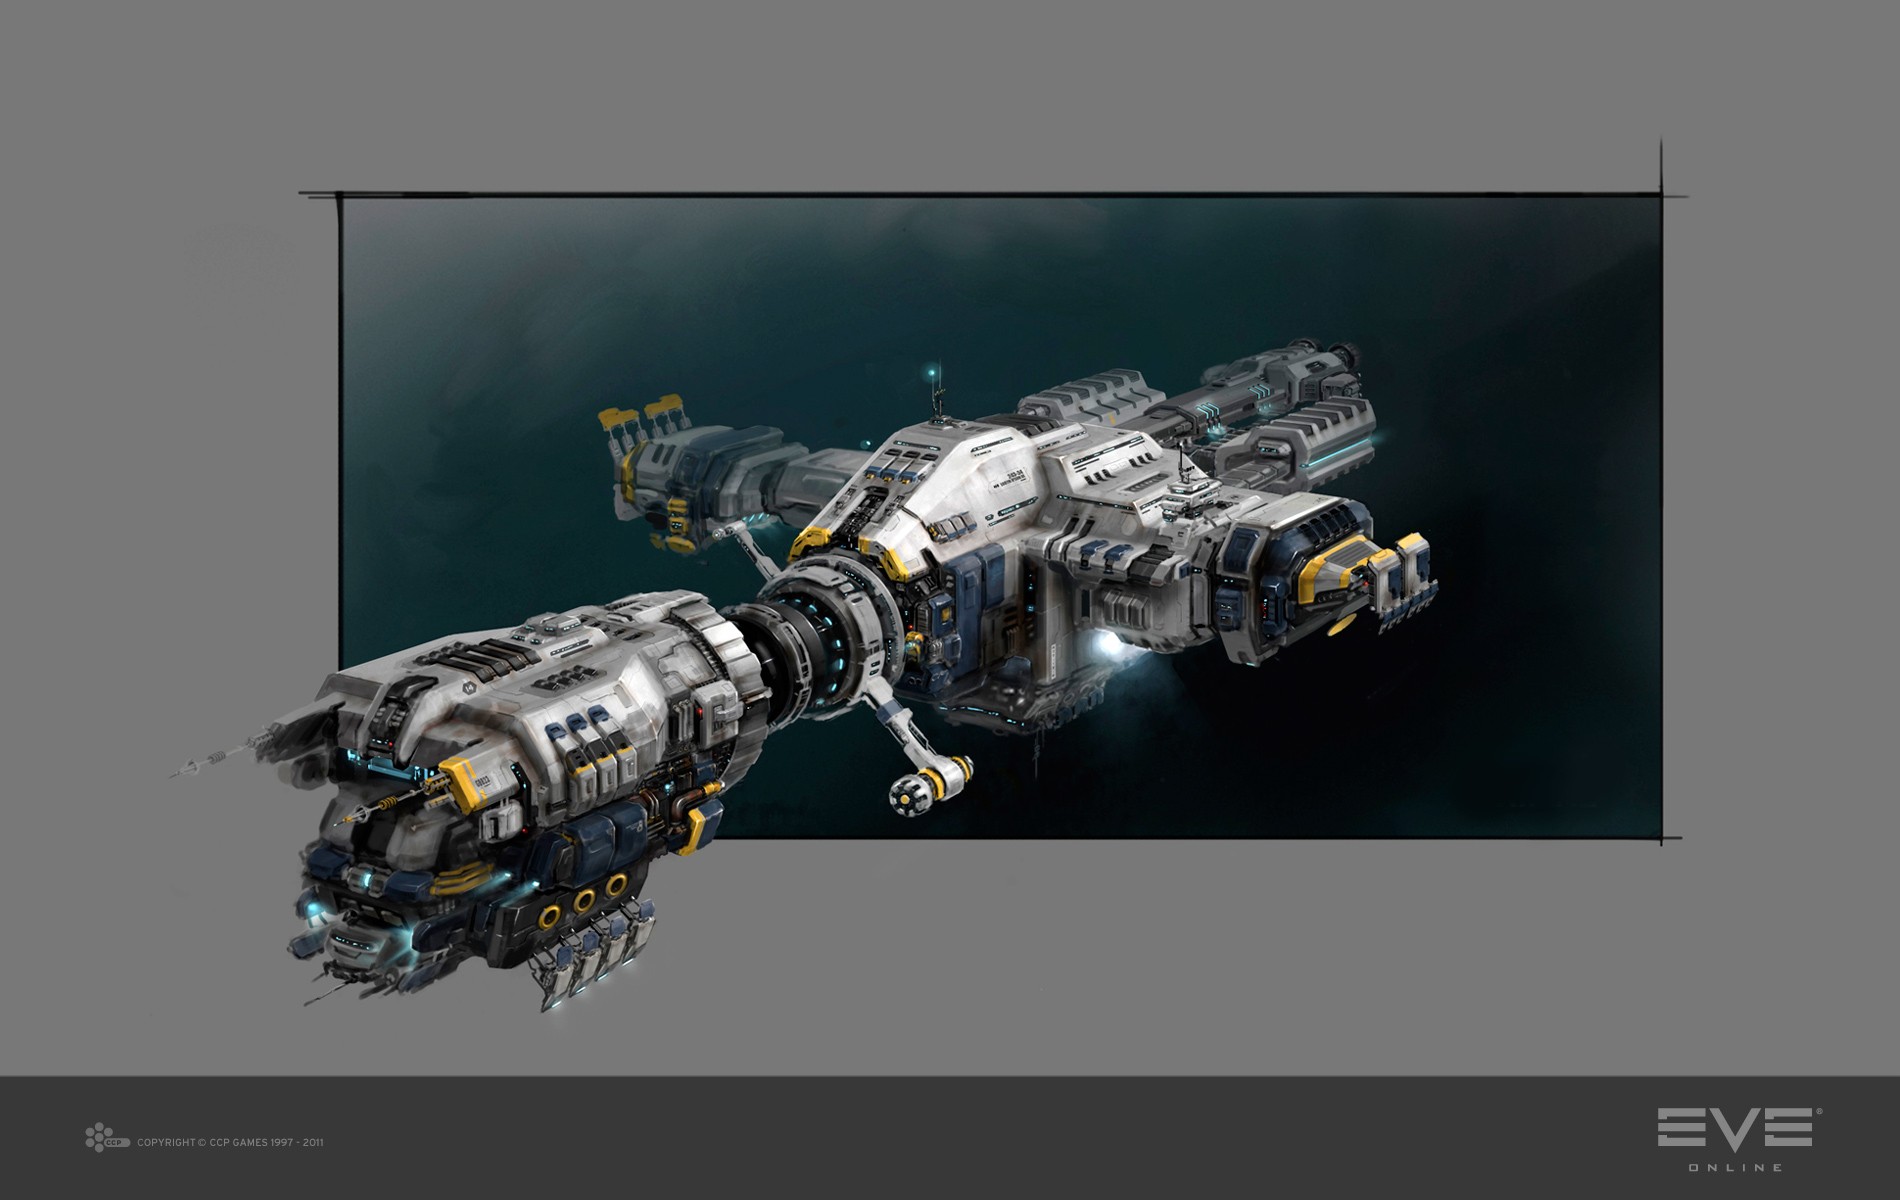 General 1900x1200 EVE Online spaceship PC gaming science fiction